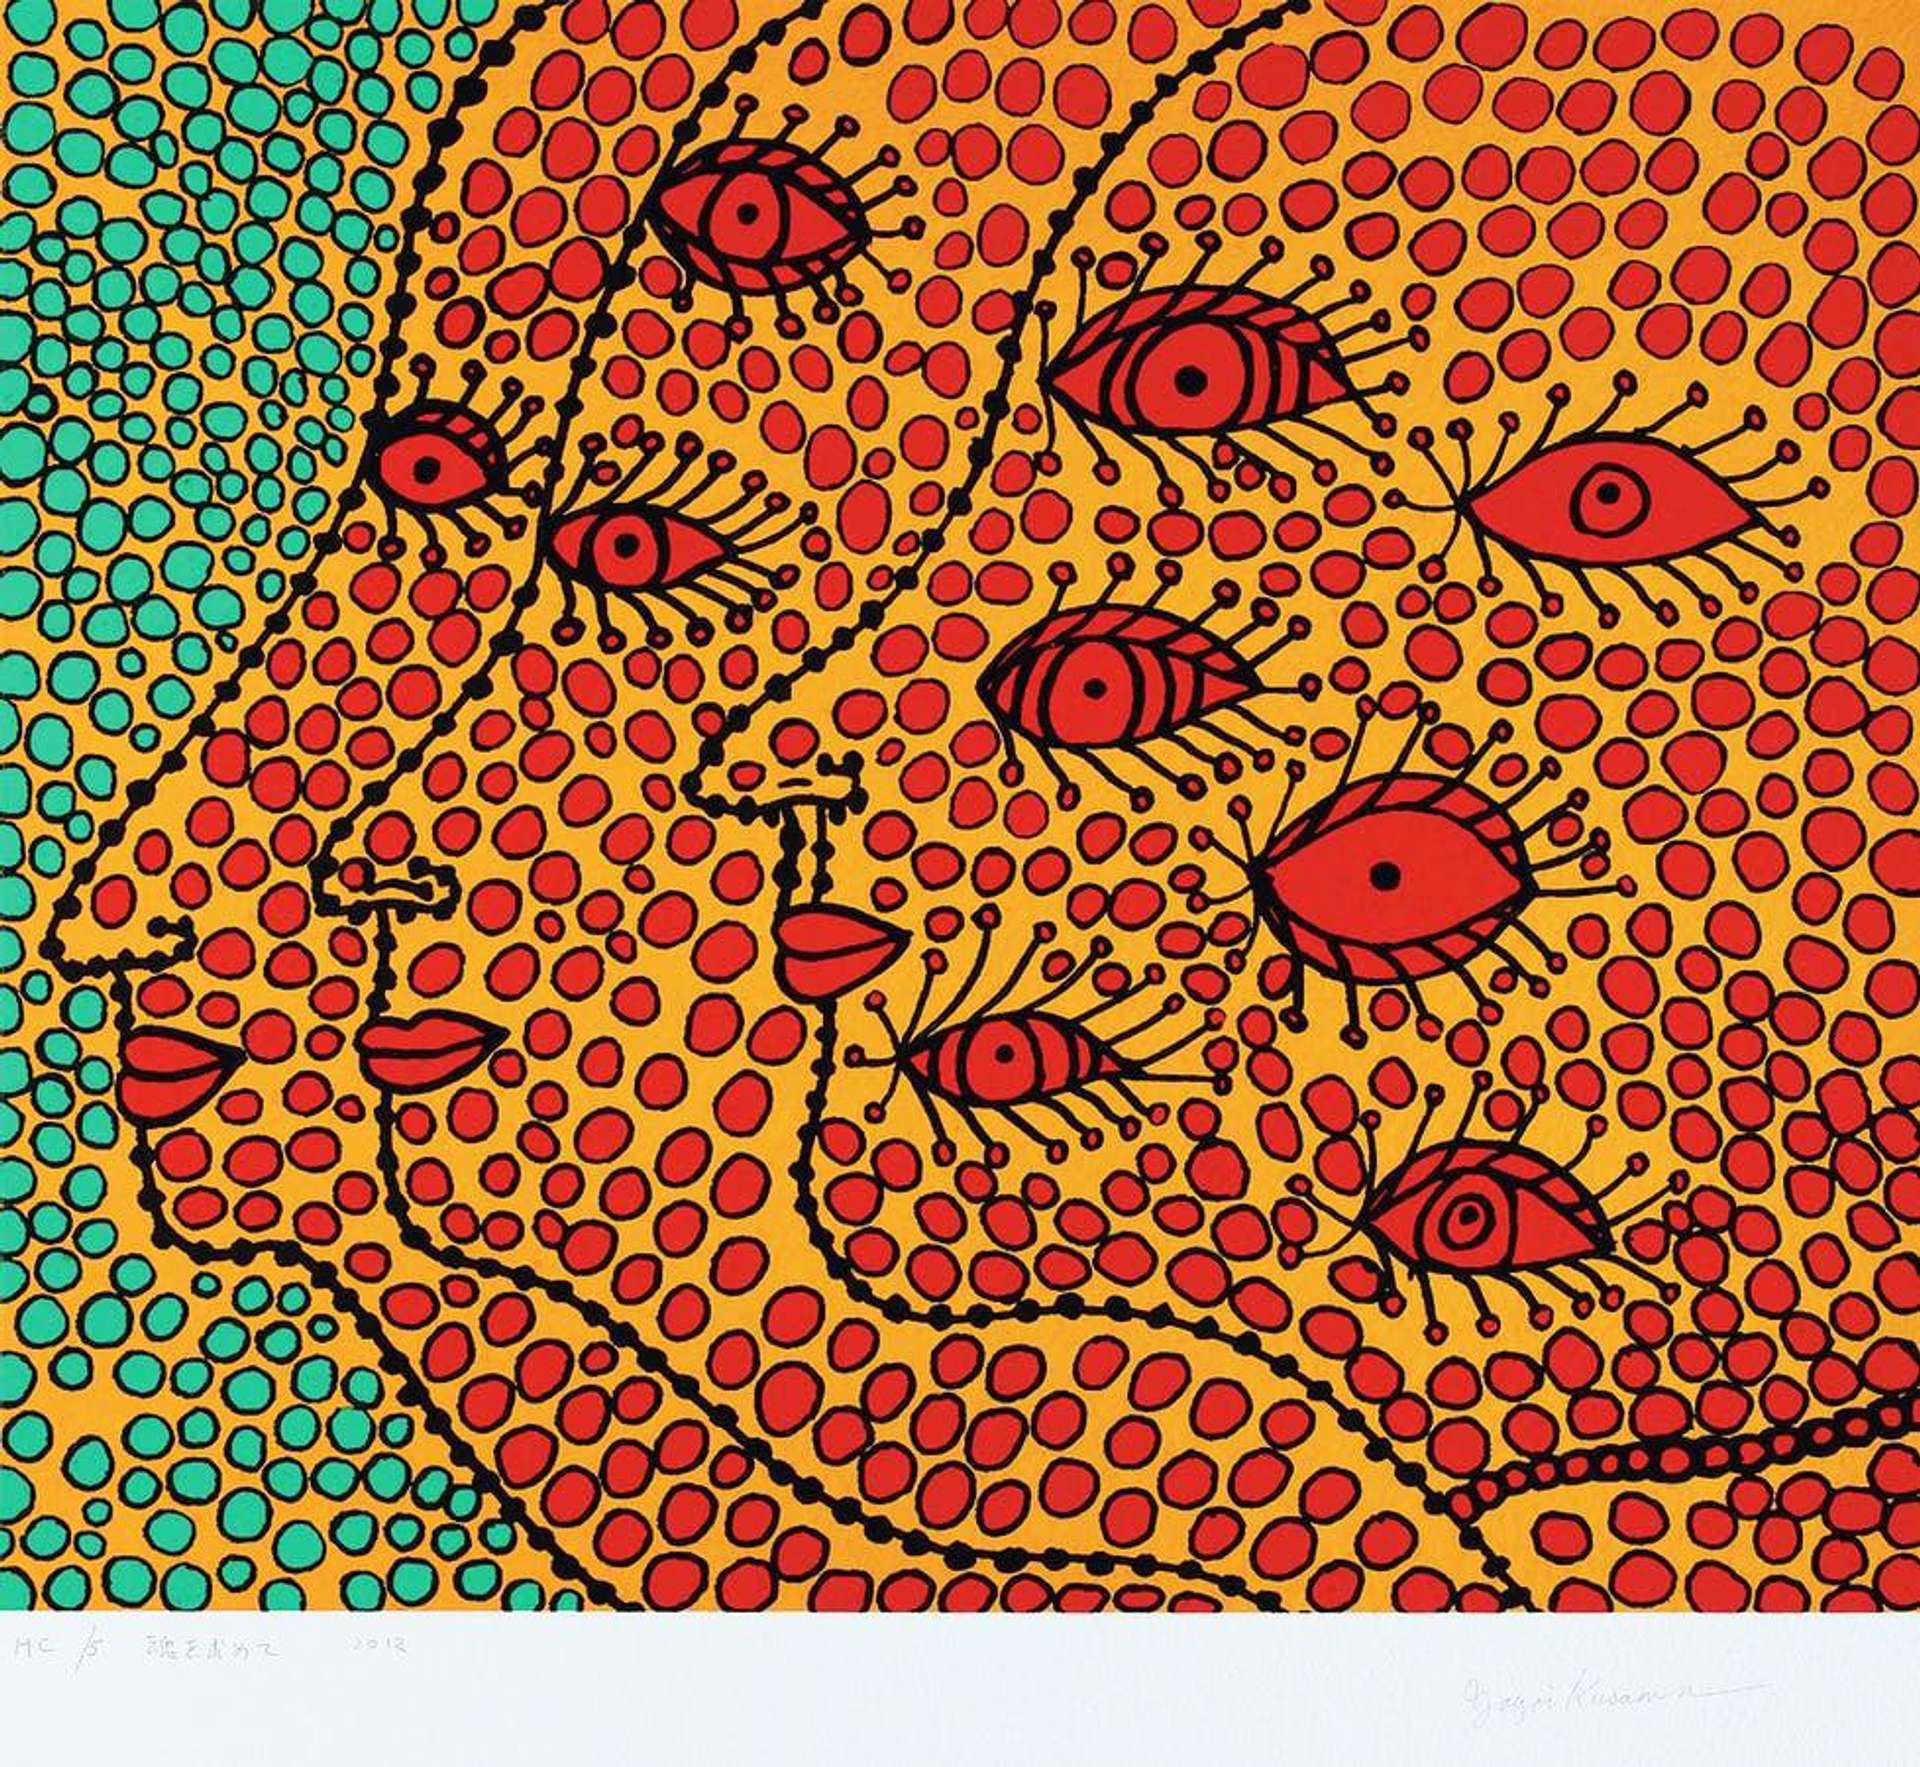 A screenprint by Yayoi Kusama depicting a series of faces in profile reaching towards the left of the composition. The faces are delineated in red, orange, and yellow dots, contrasting the green dot background.